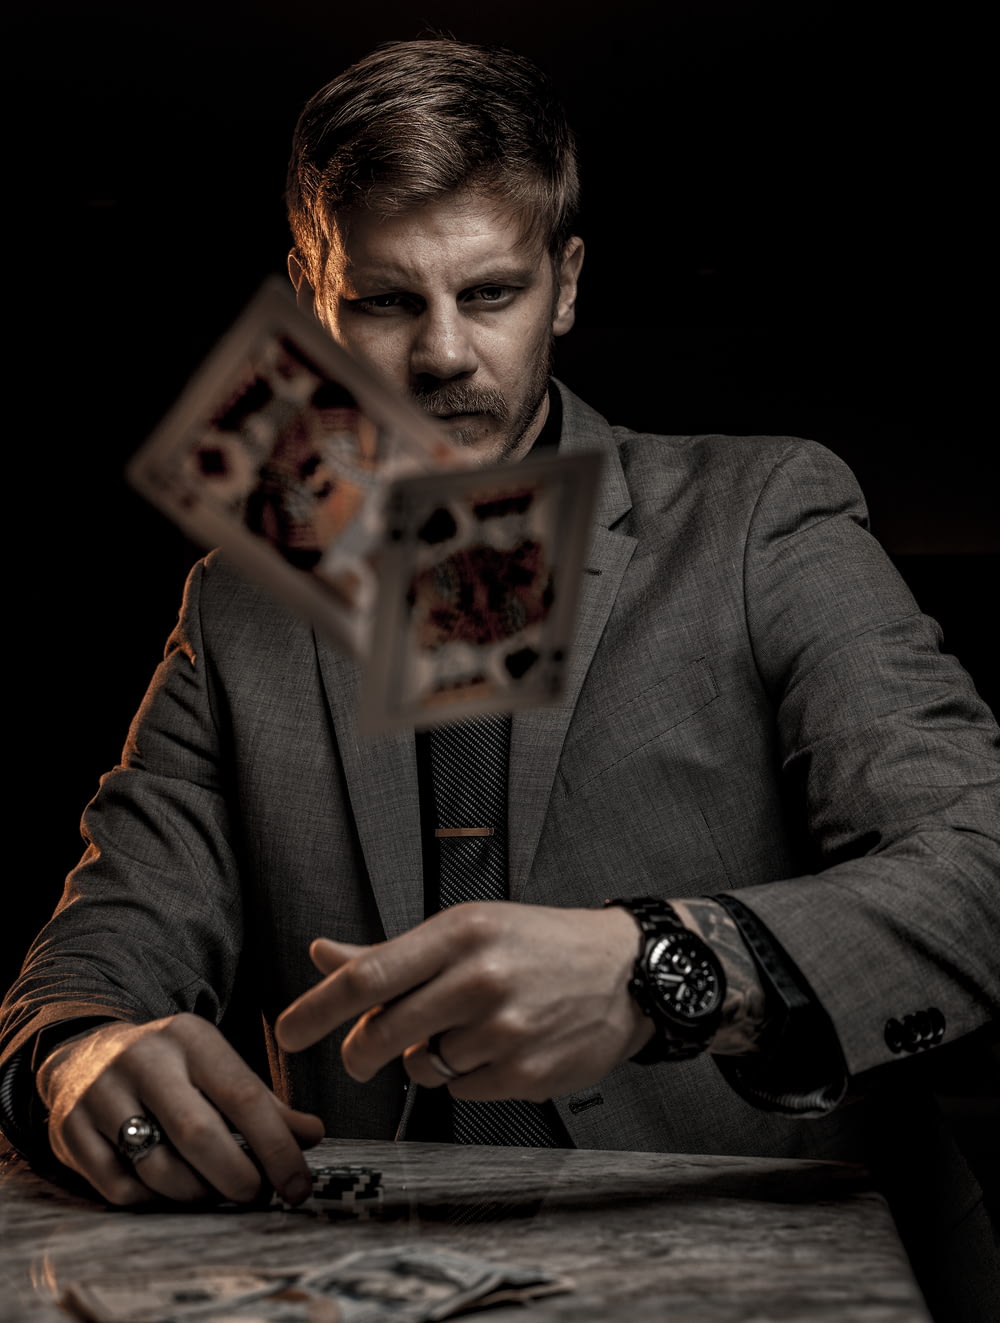 man in gray suit jacket holding jack of diamonds playing card